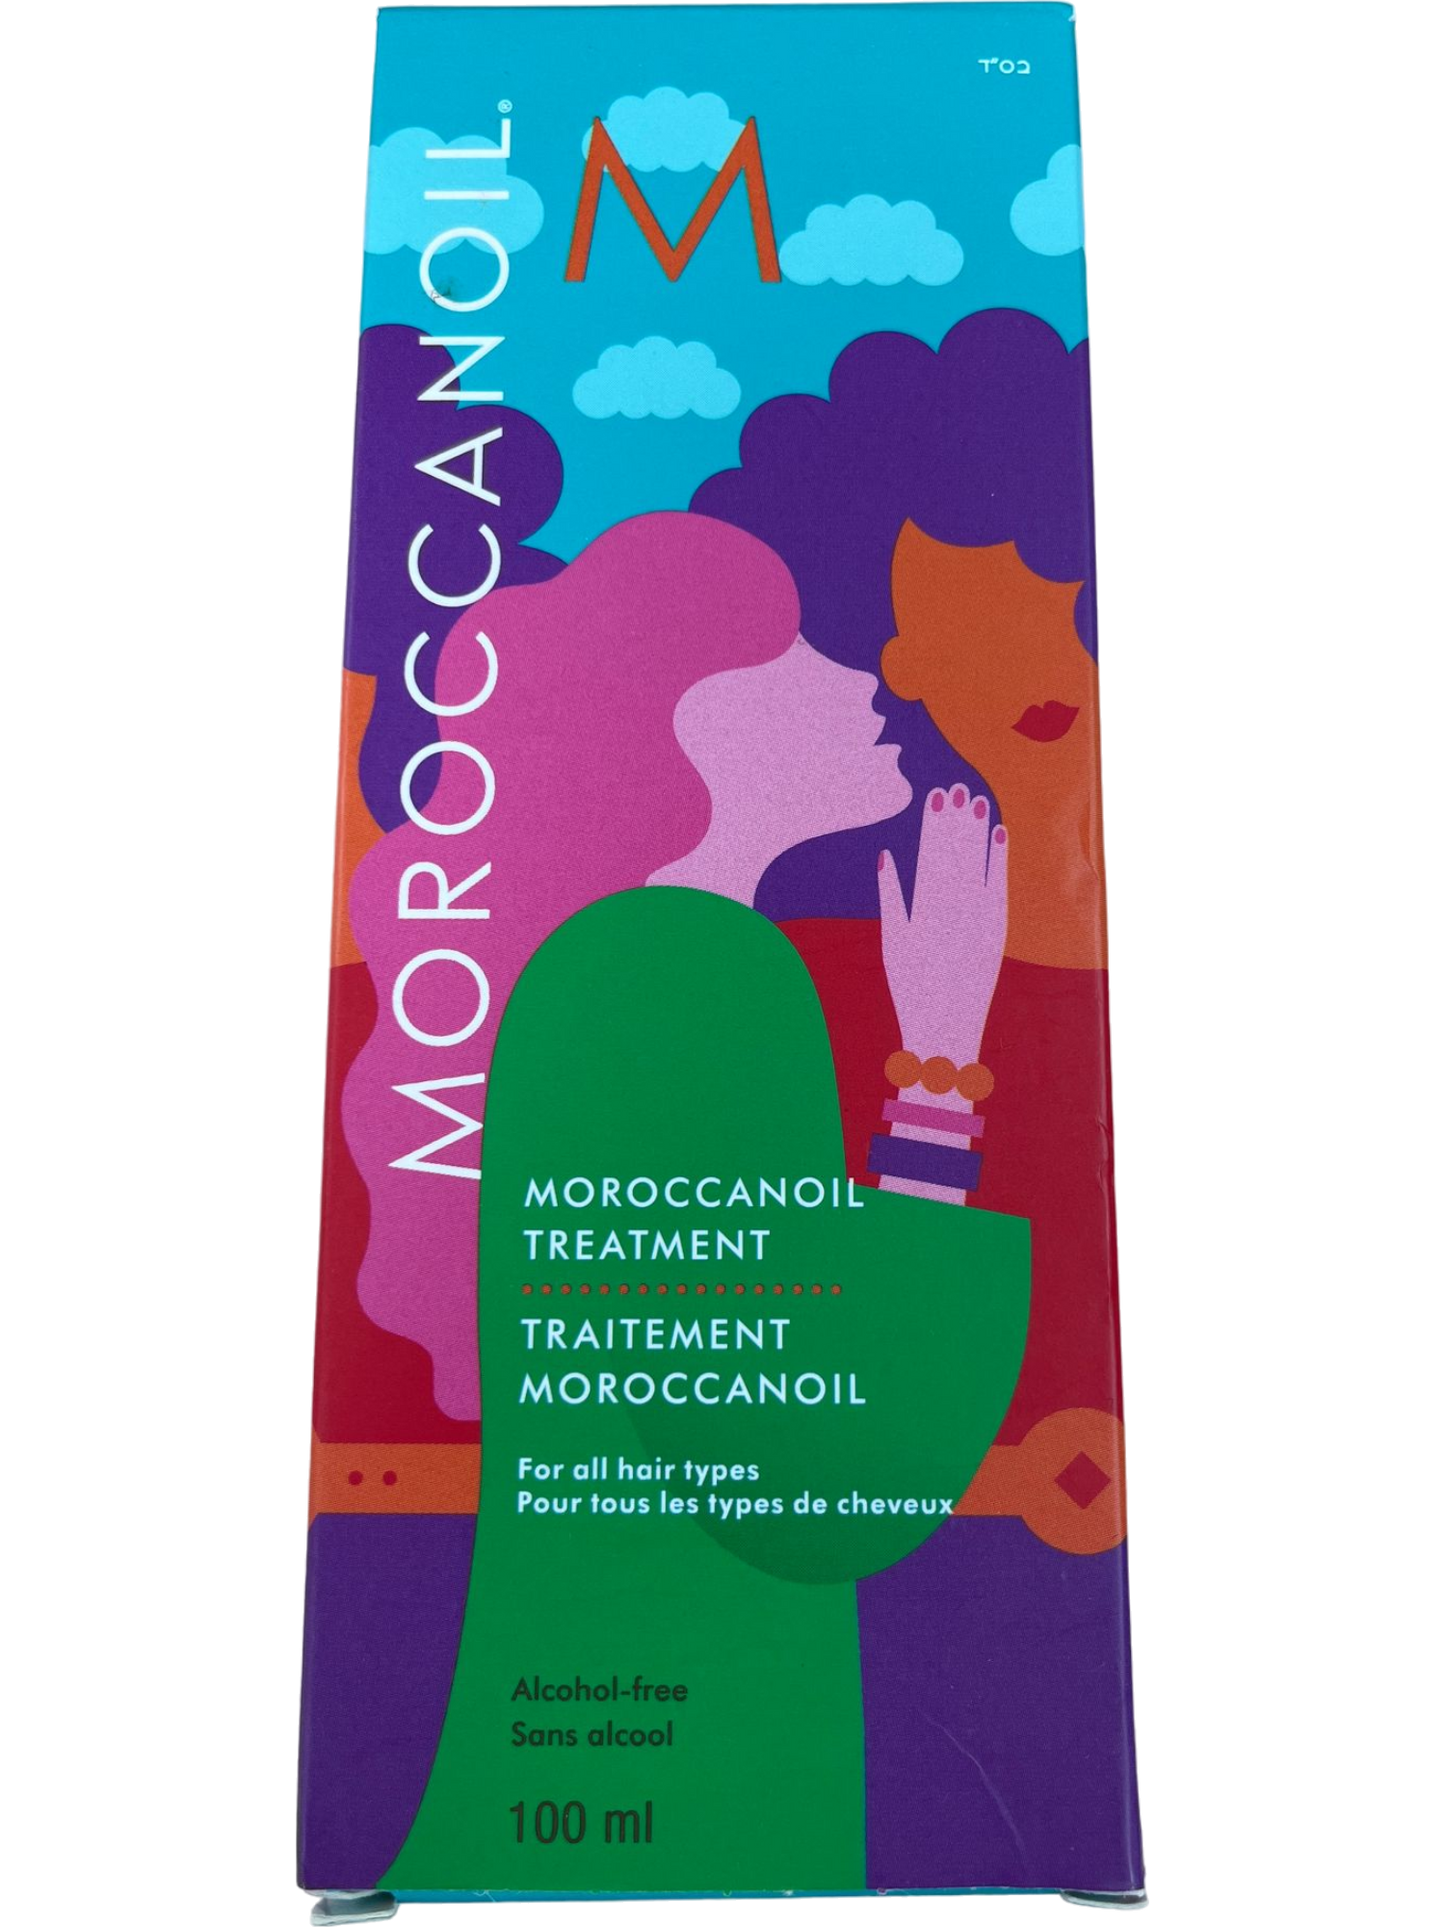 Moroccanoil Treatment Hair Treatment for All Hair Types Limited Edition 100ml